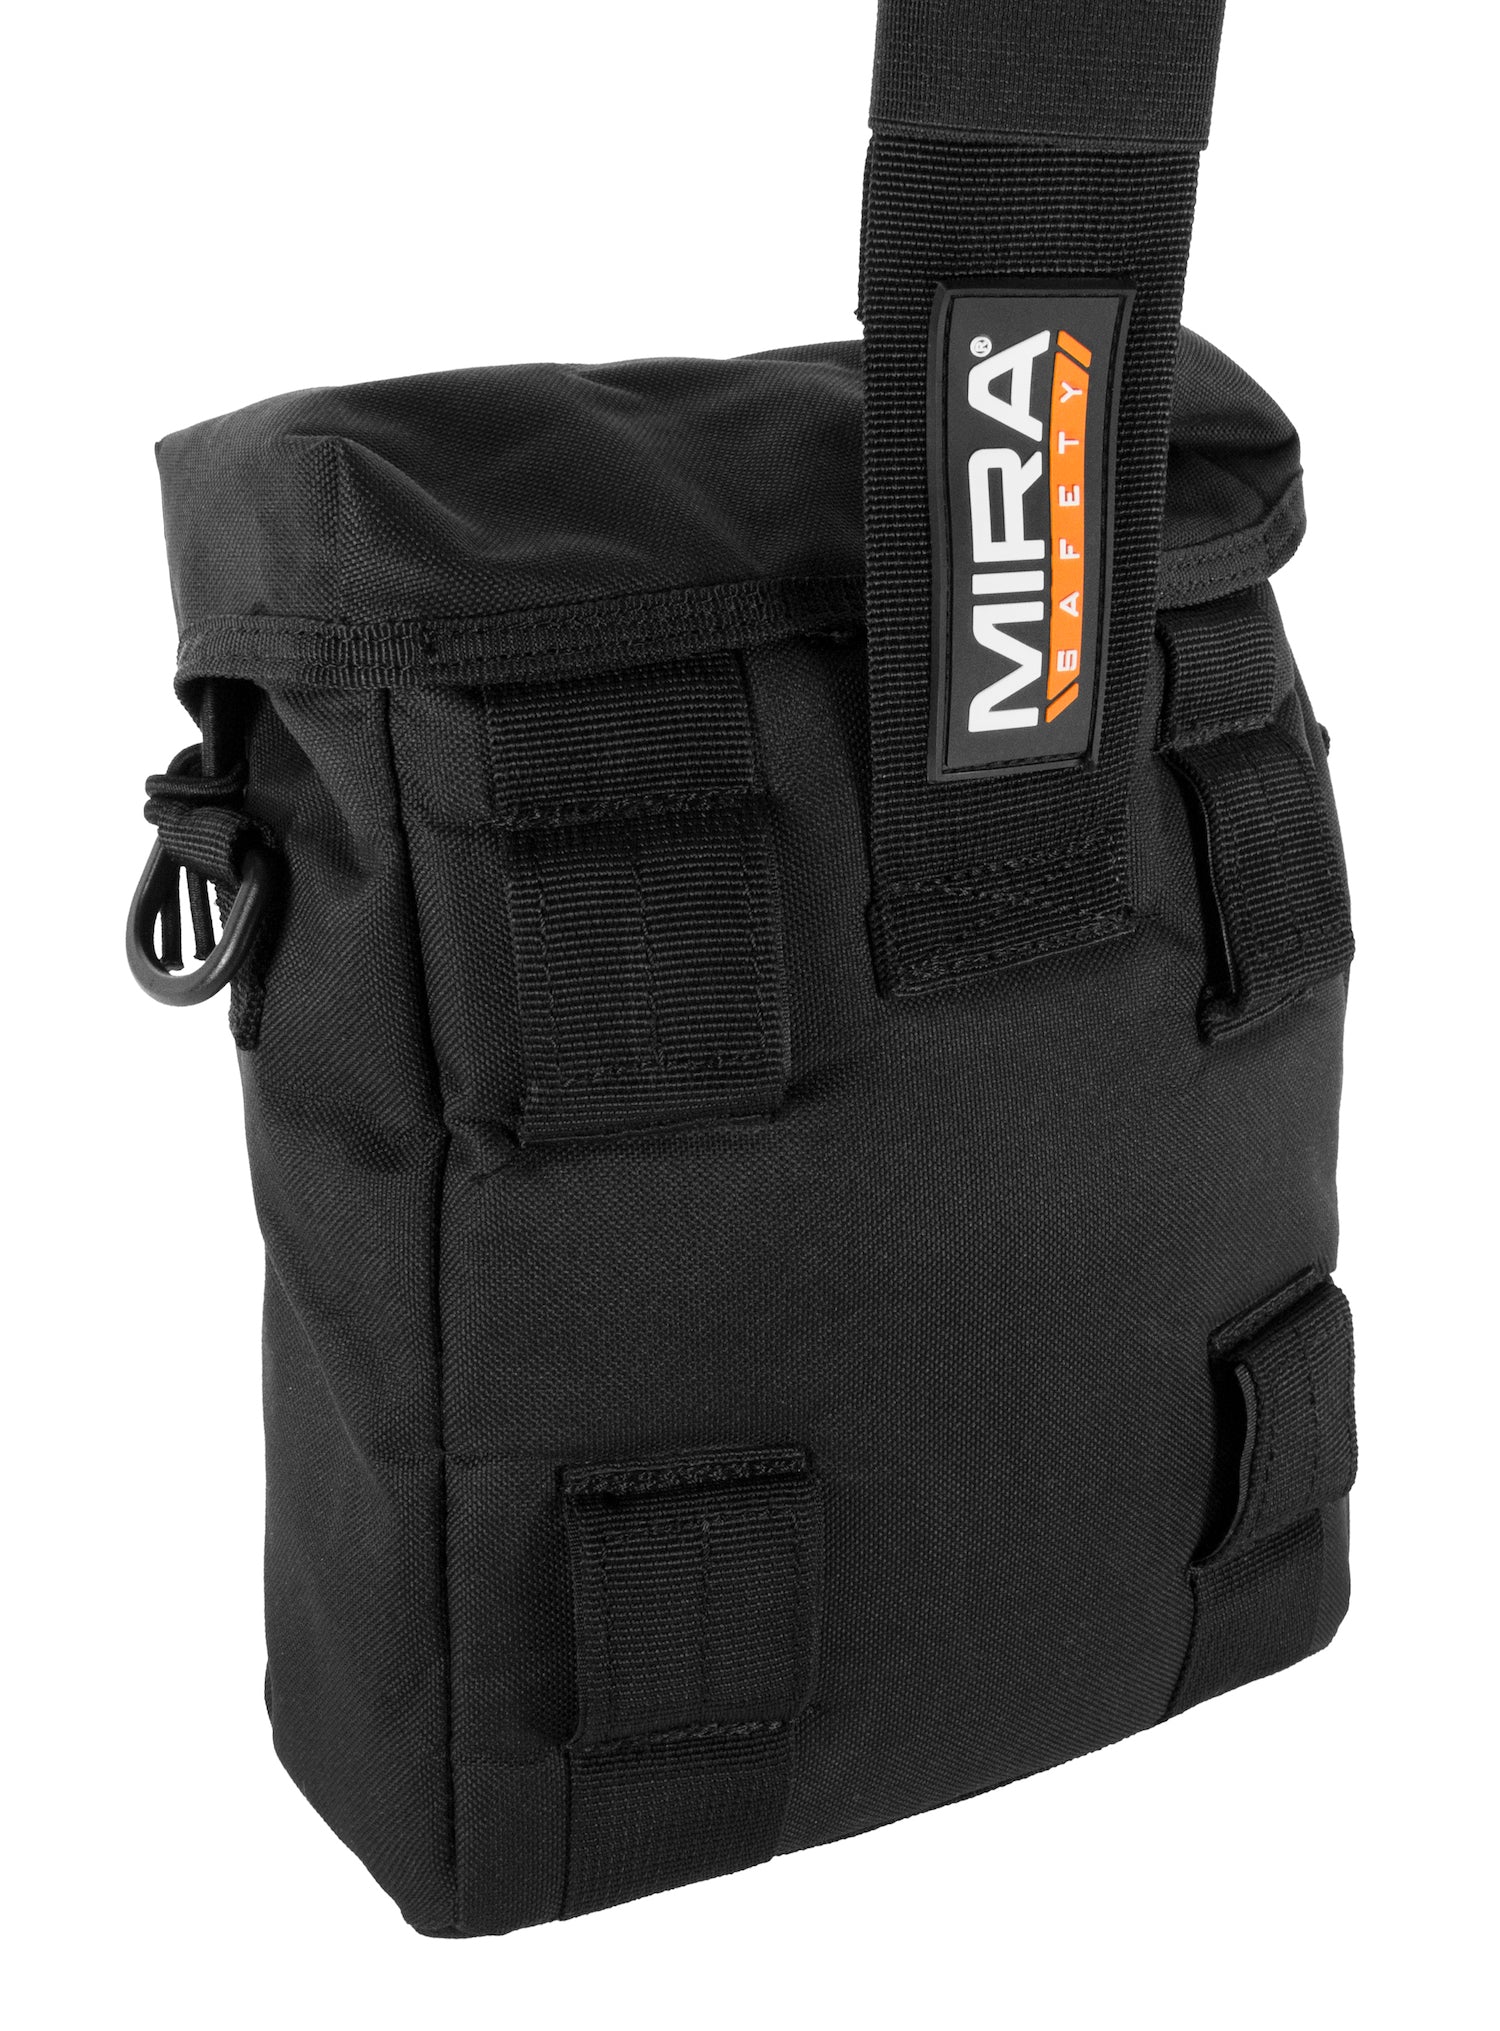 5.11 Tactical MIRA 2-in-1 Backpack, 25L with India | Ubuy